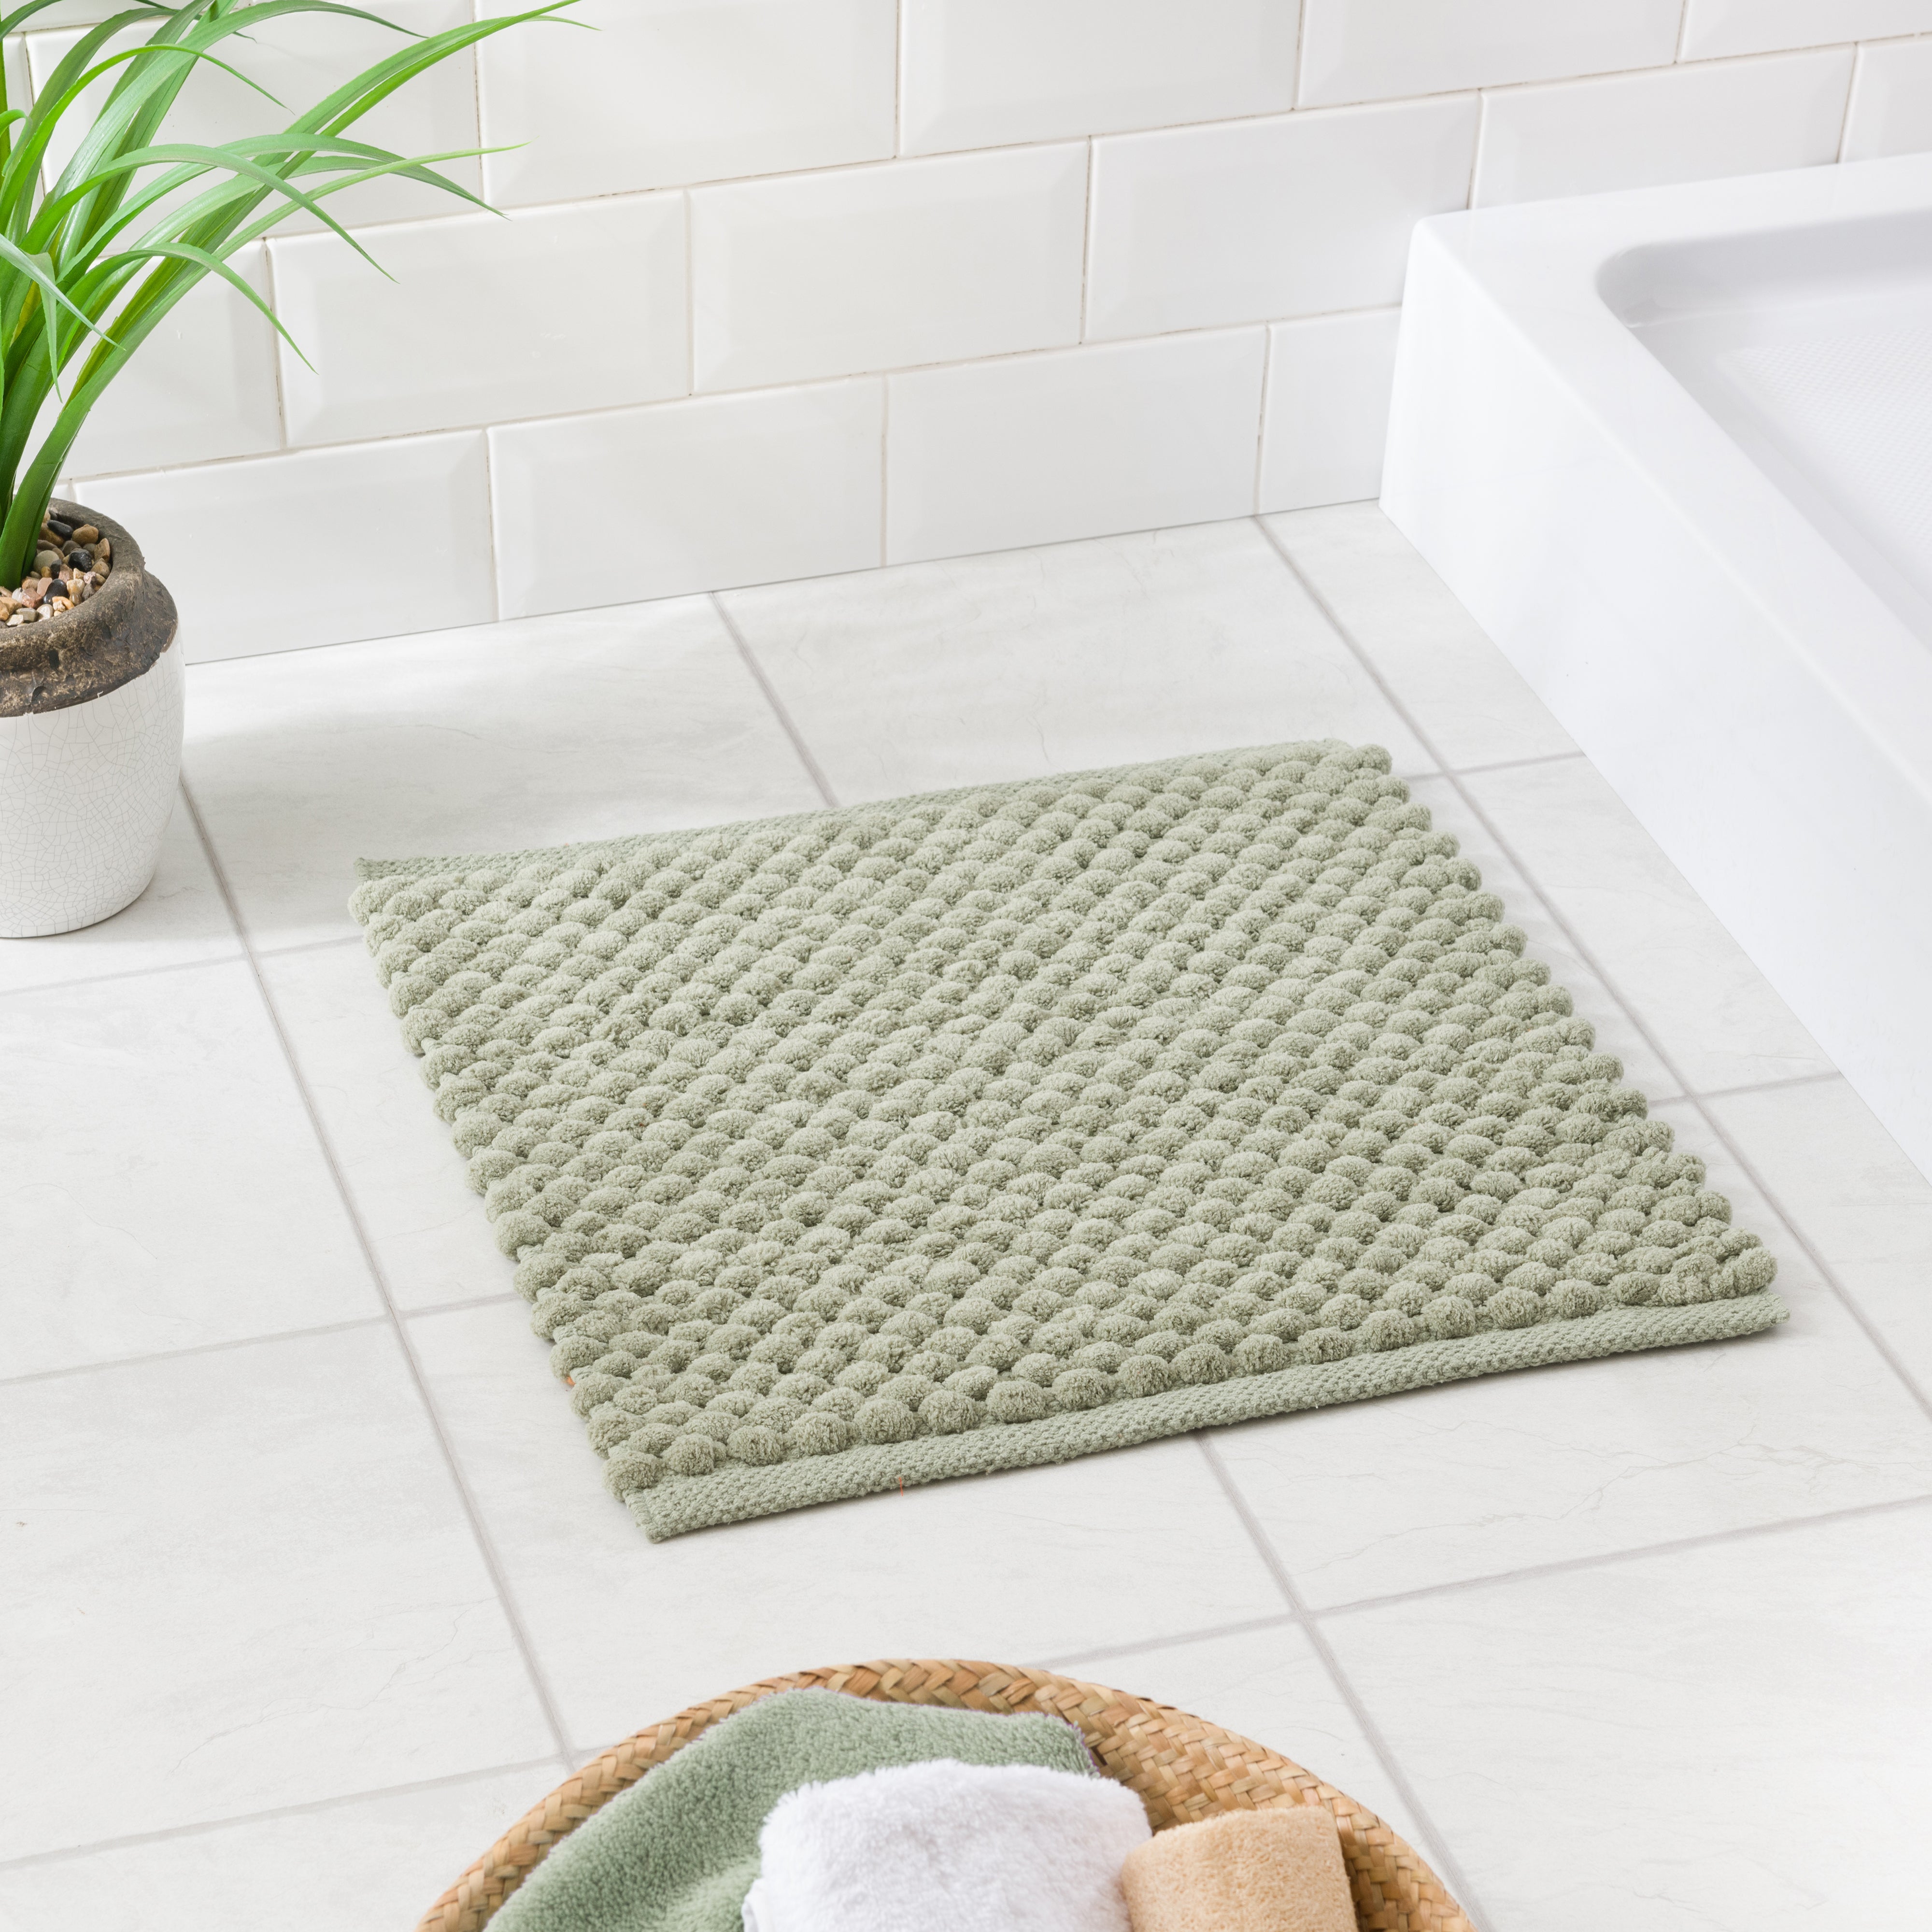 100 Recycled Pebble Shower Bath Mat Green